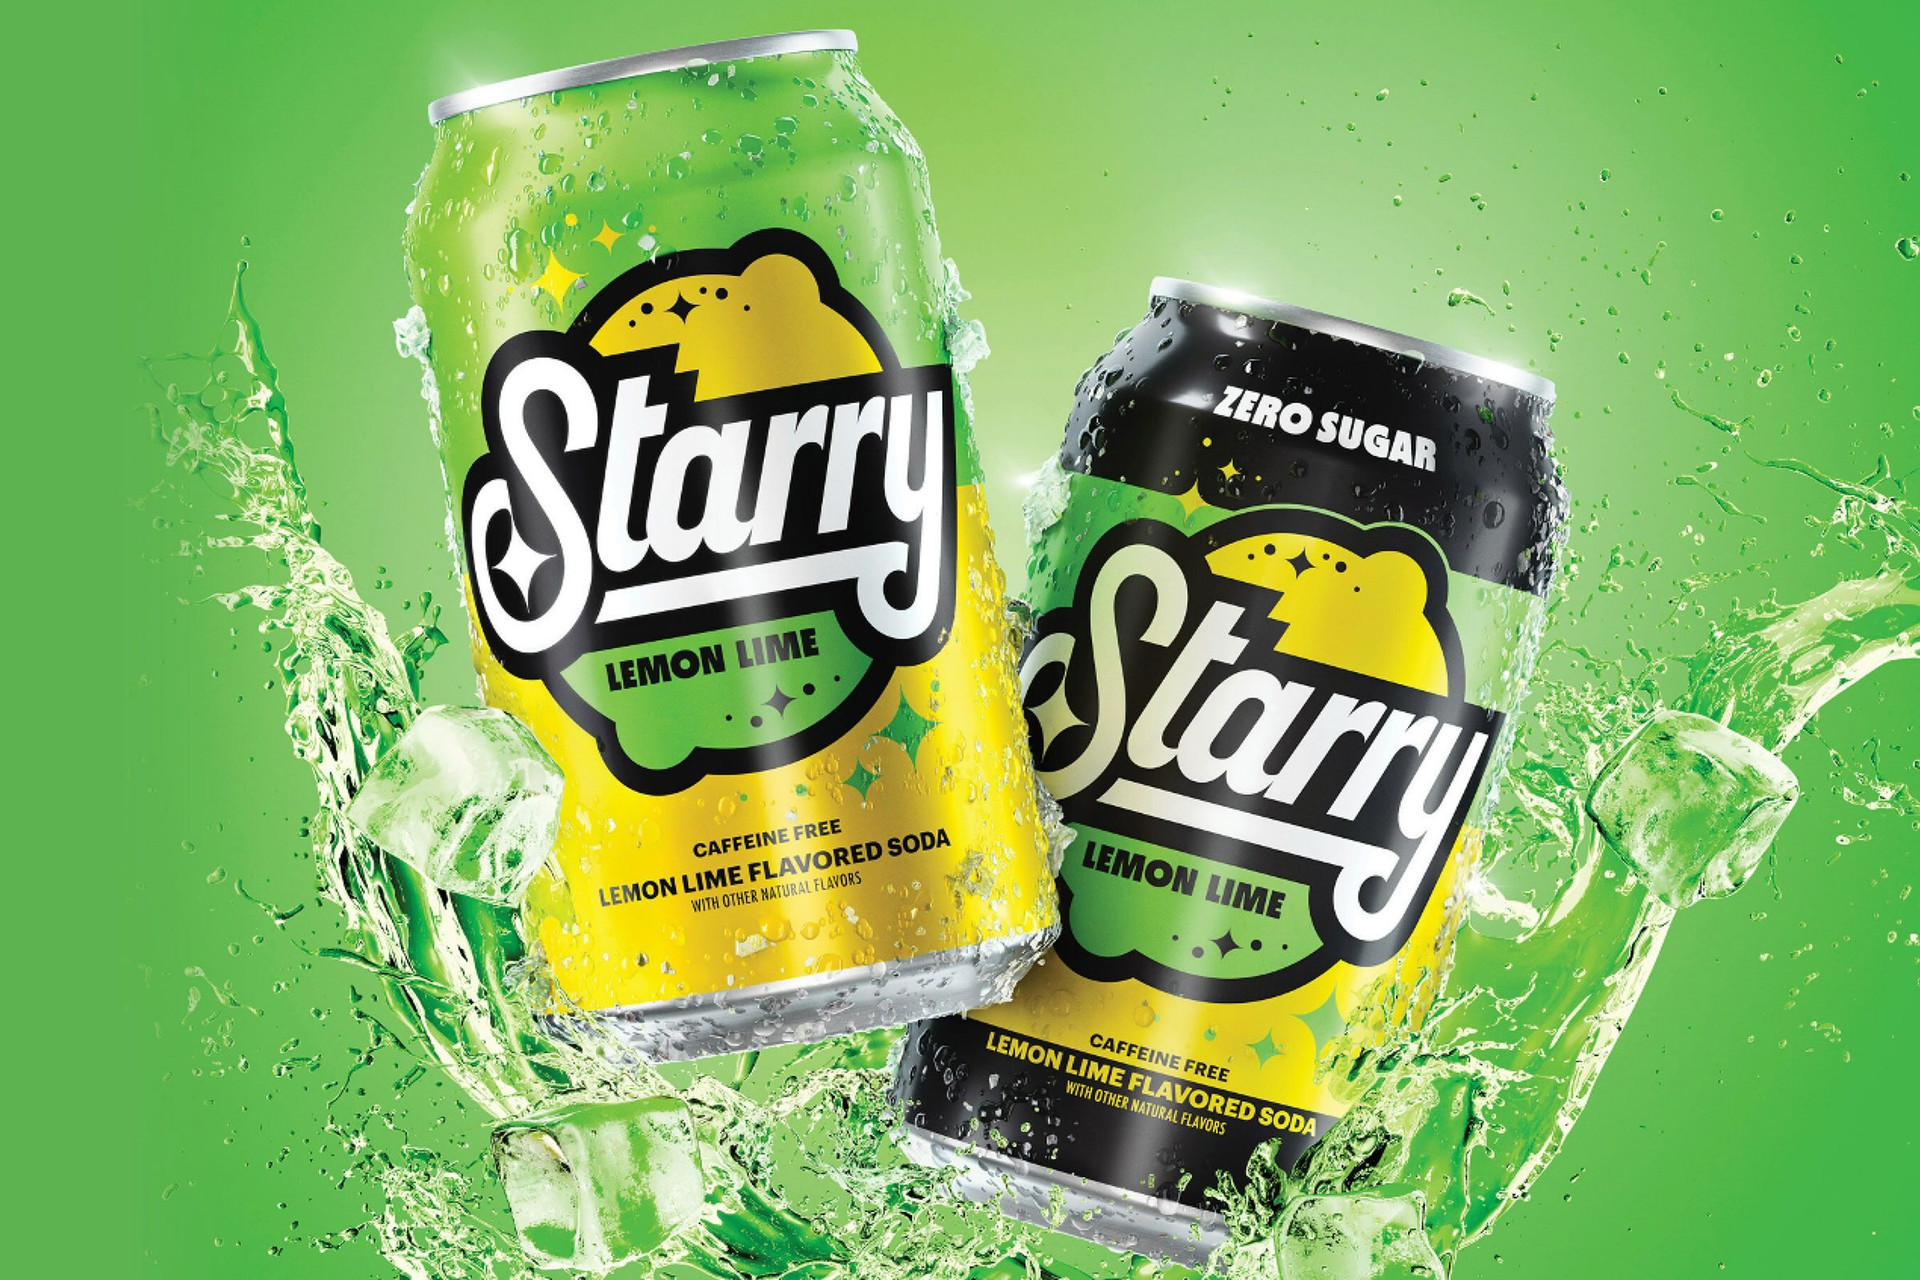 starry-lemon-lime-soda-cans-dh-toh-resize-crop-courtesy-pepsico.jpg